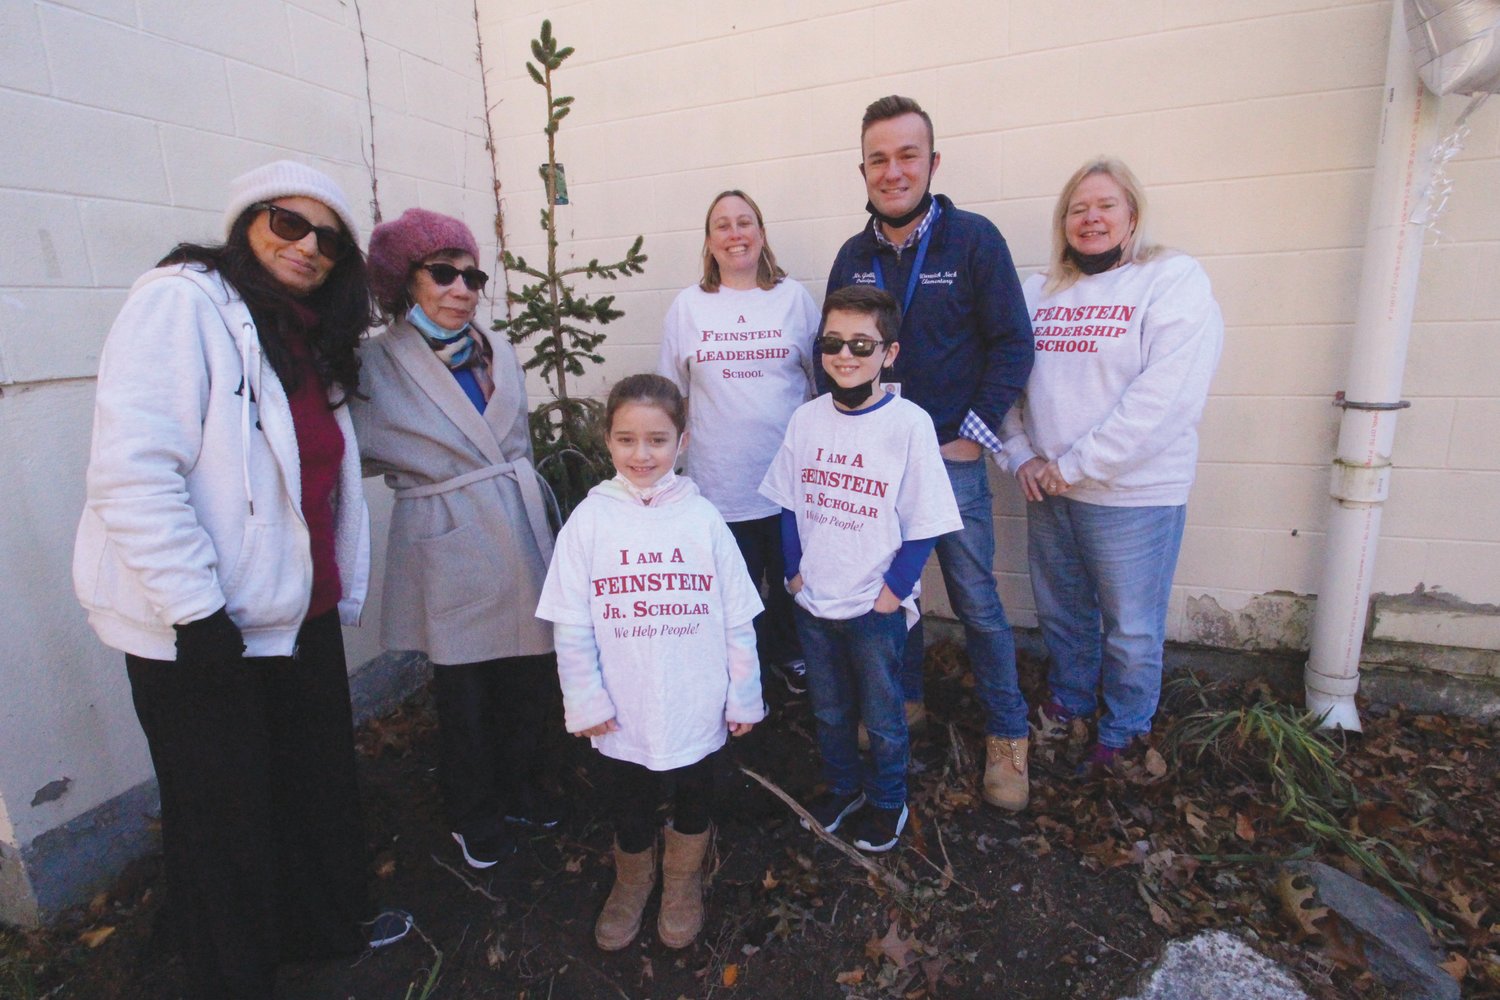 A SPECIAL PLACE: Leila Feinstein and her mother Dr. Pat Feinstein are joined by those who participated in the memorial tree ceremony, Eva Lesuer, Alex Gemma, Dana Scolano, Principal Frank Galligan and Cathy Maguire.